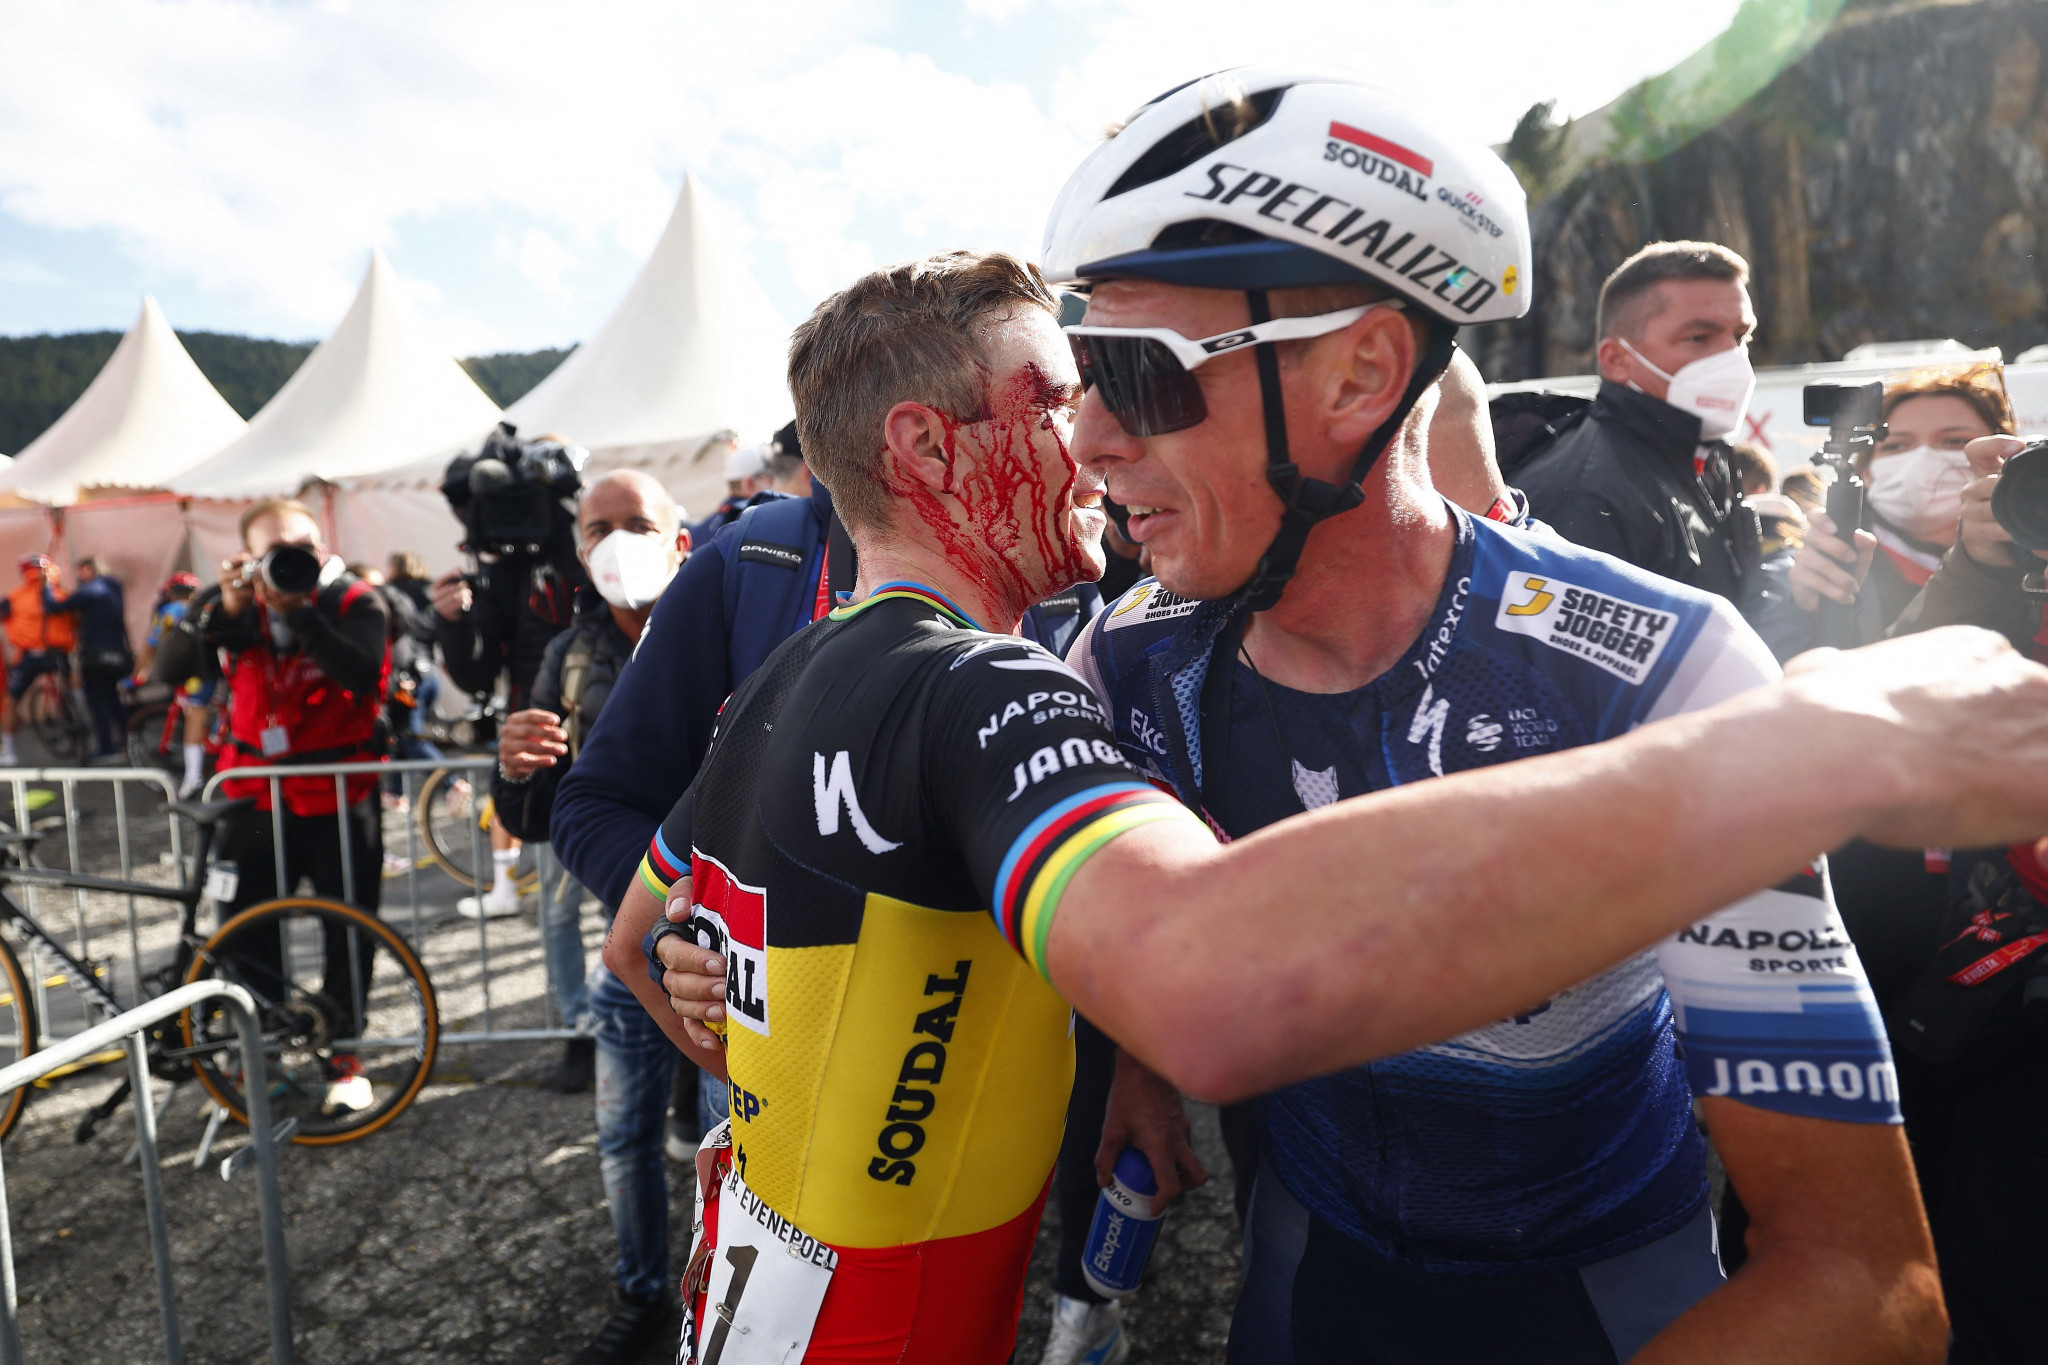 Blood streams down Evenepoel's face after stage three Vuelta a España win